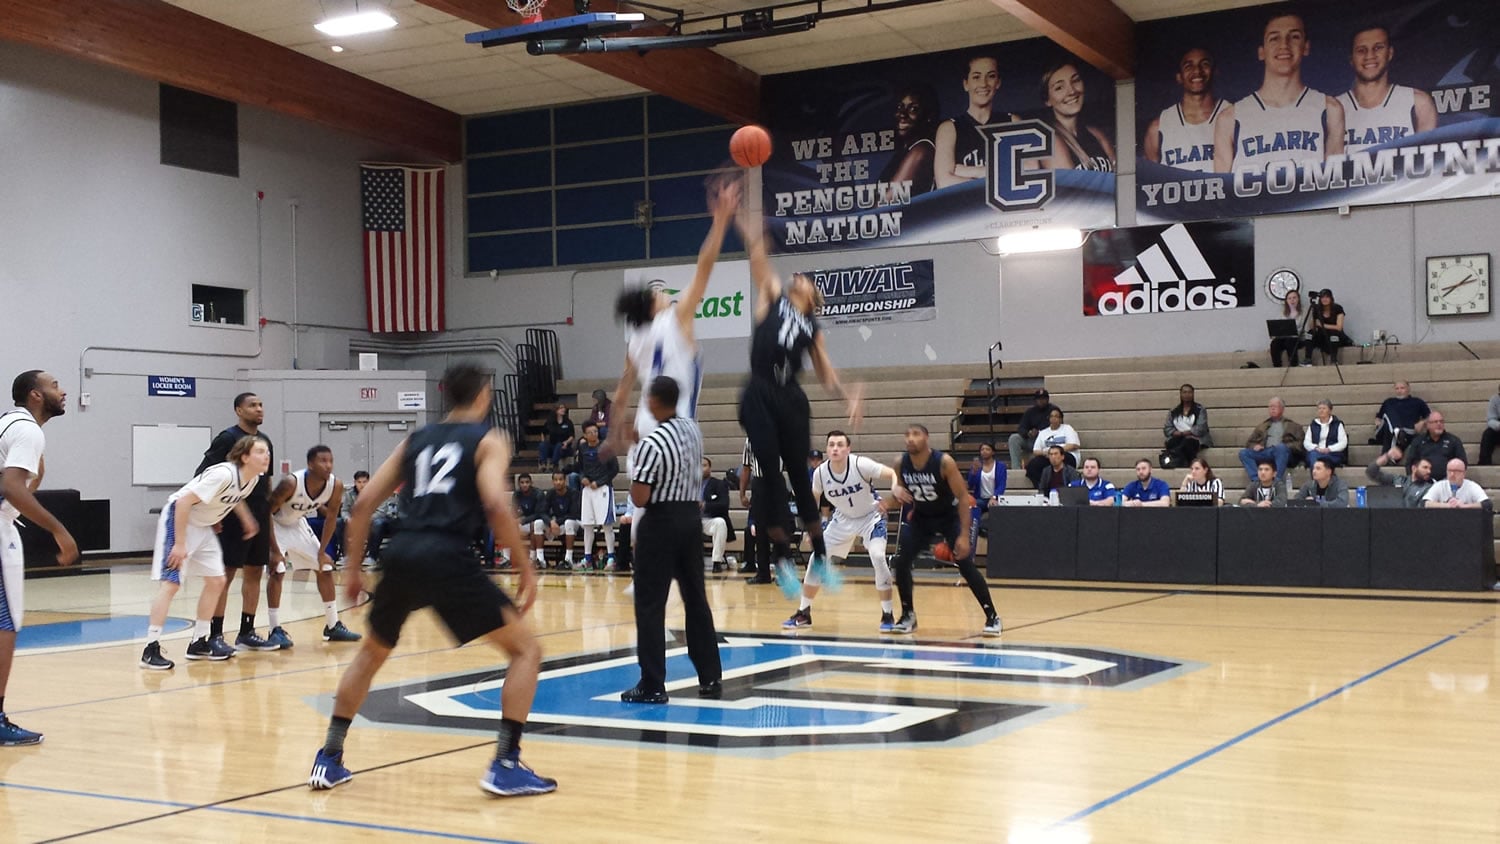 Clark and Tacoma tipoff their NWAC playoff game at the O'Connell Center in Vancouver on Saturday, March 5, 2016.